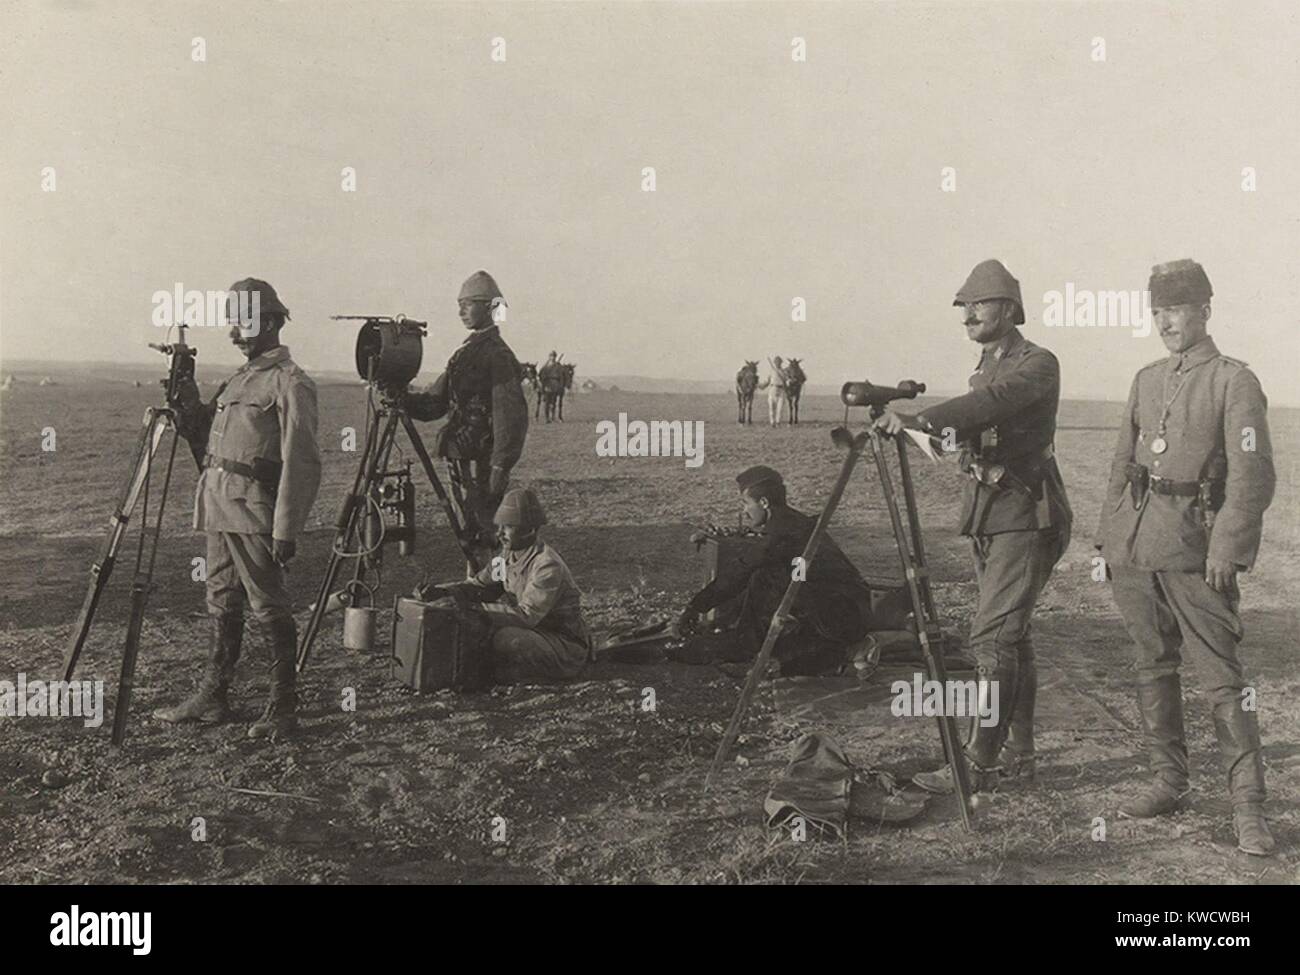 World War 1 in the Middle East. Turkish troops use a Heliograph, solar telegraph that signals by flashes of sunlight. The soldiers are at Huj, in Gaza, the site of a British victory on Nov. 7, 1917. (BSLOC 2013 1 61) Stock Photo